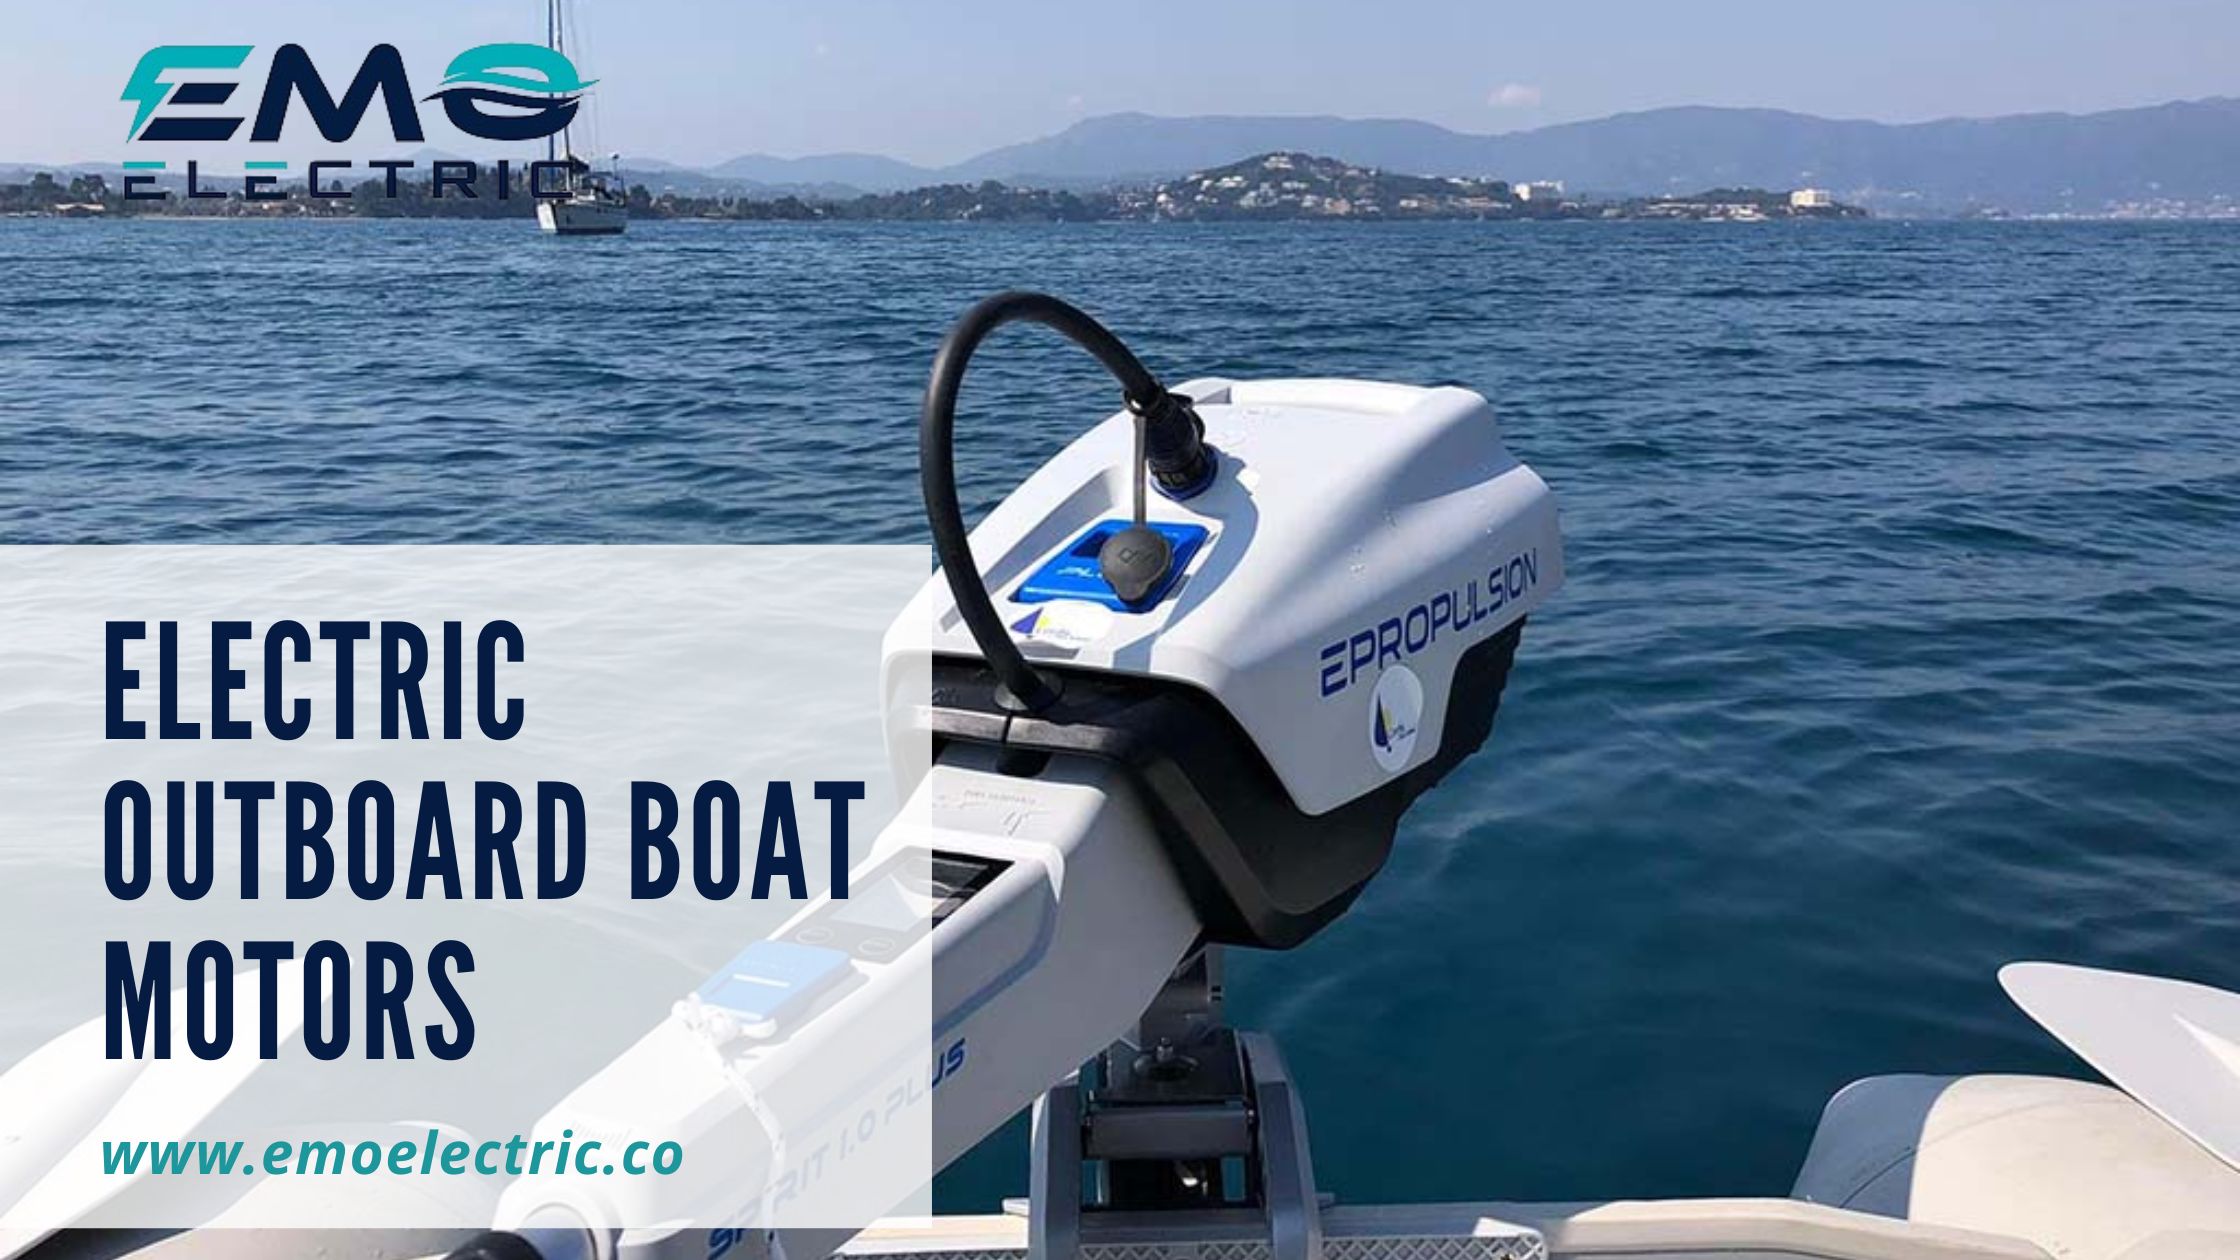 Electronic dwells the future of boating - EMO Electric